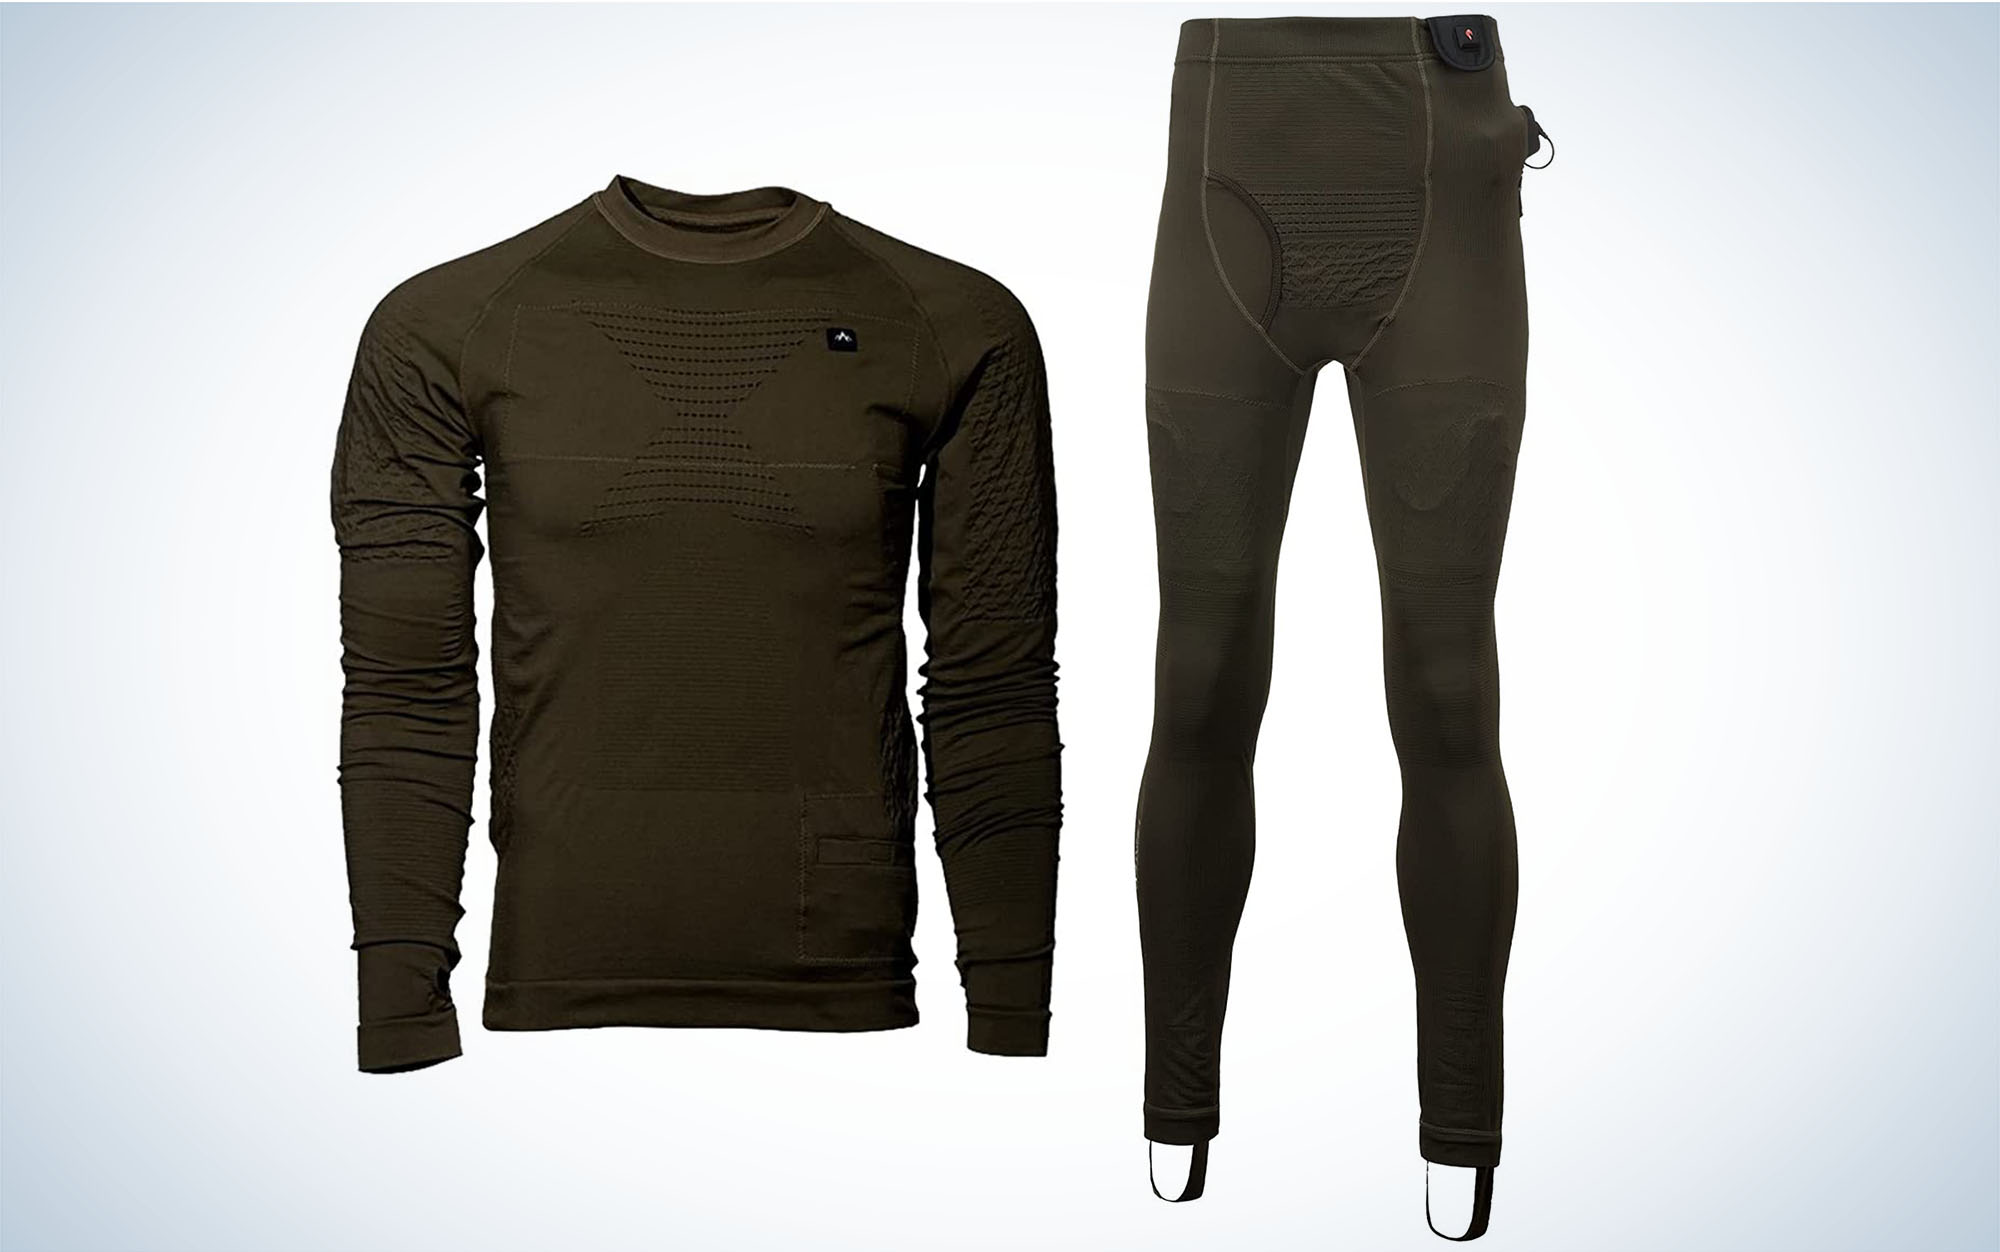 The Pnuma Outdoors ICONX Heated Core Shirt and Pants are the best electric thermal underwear for men.